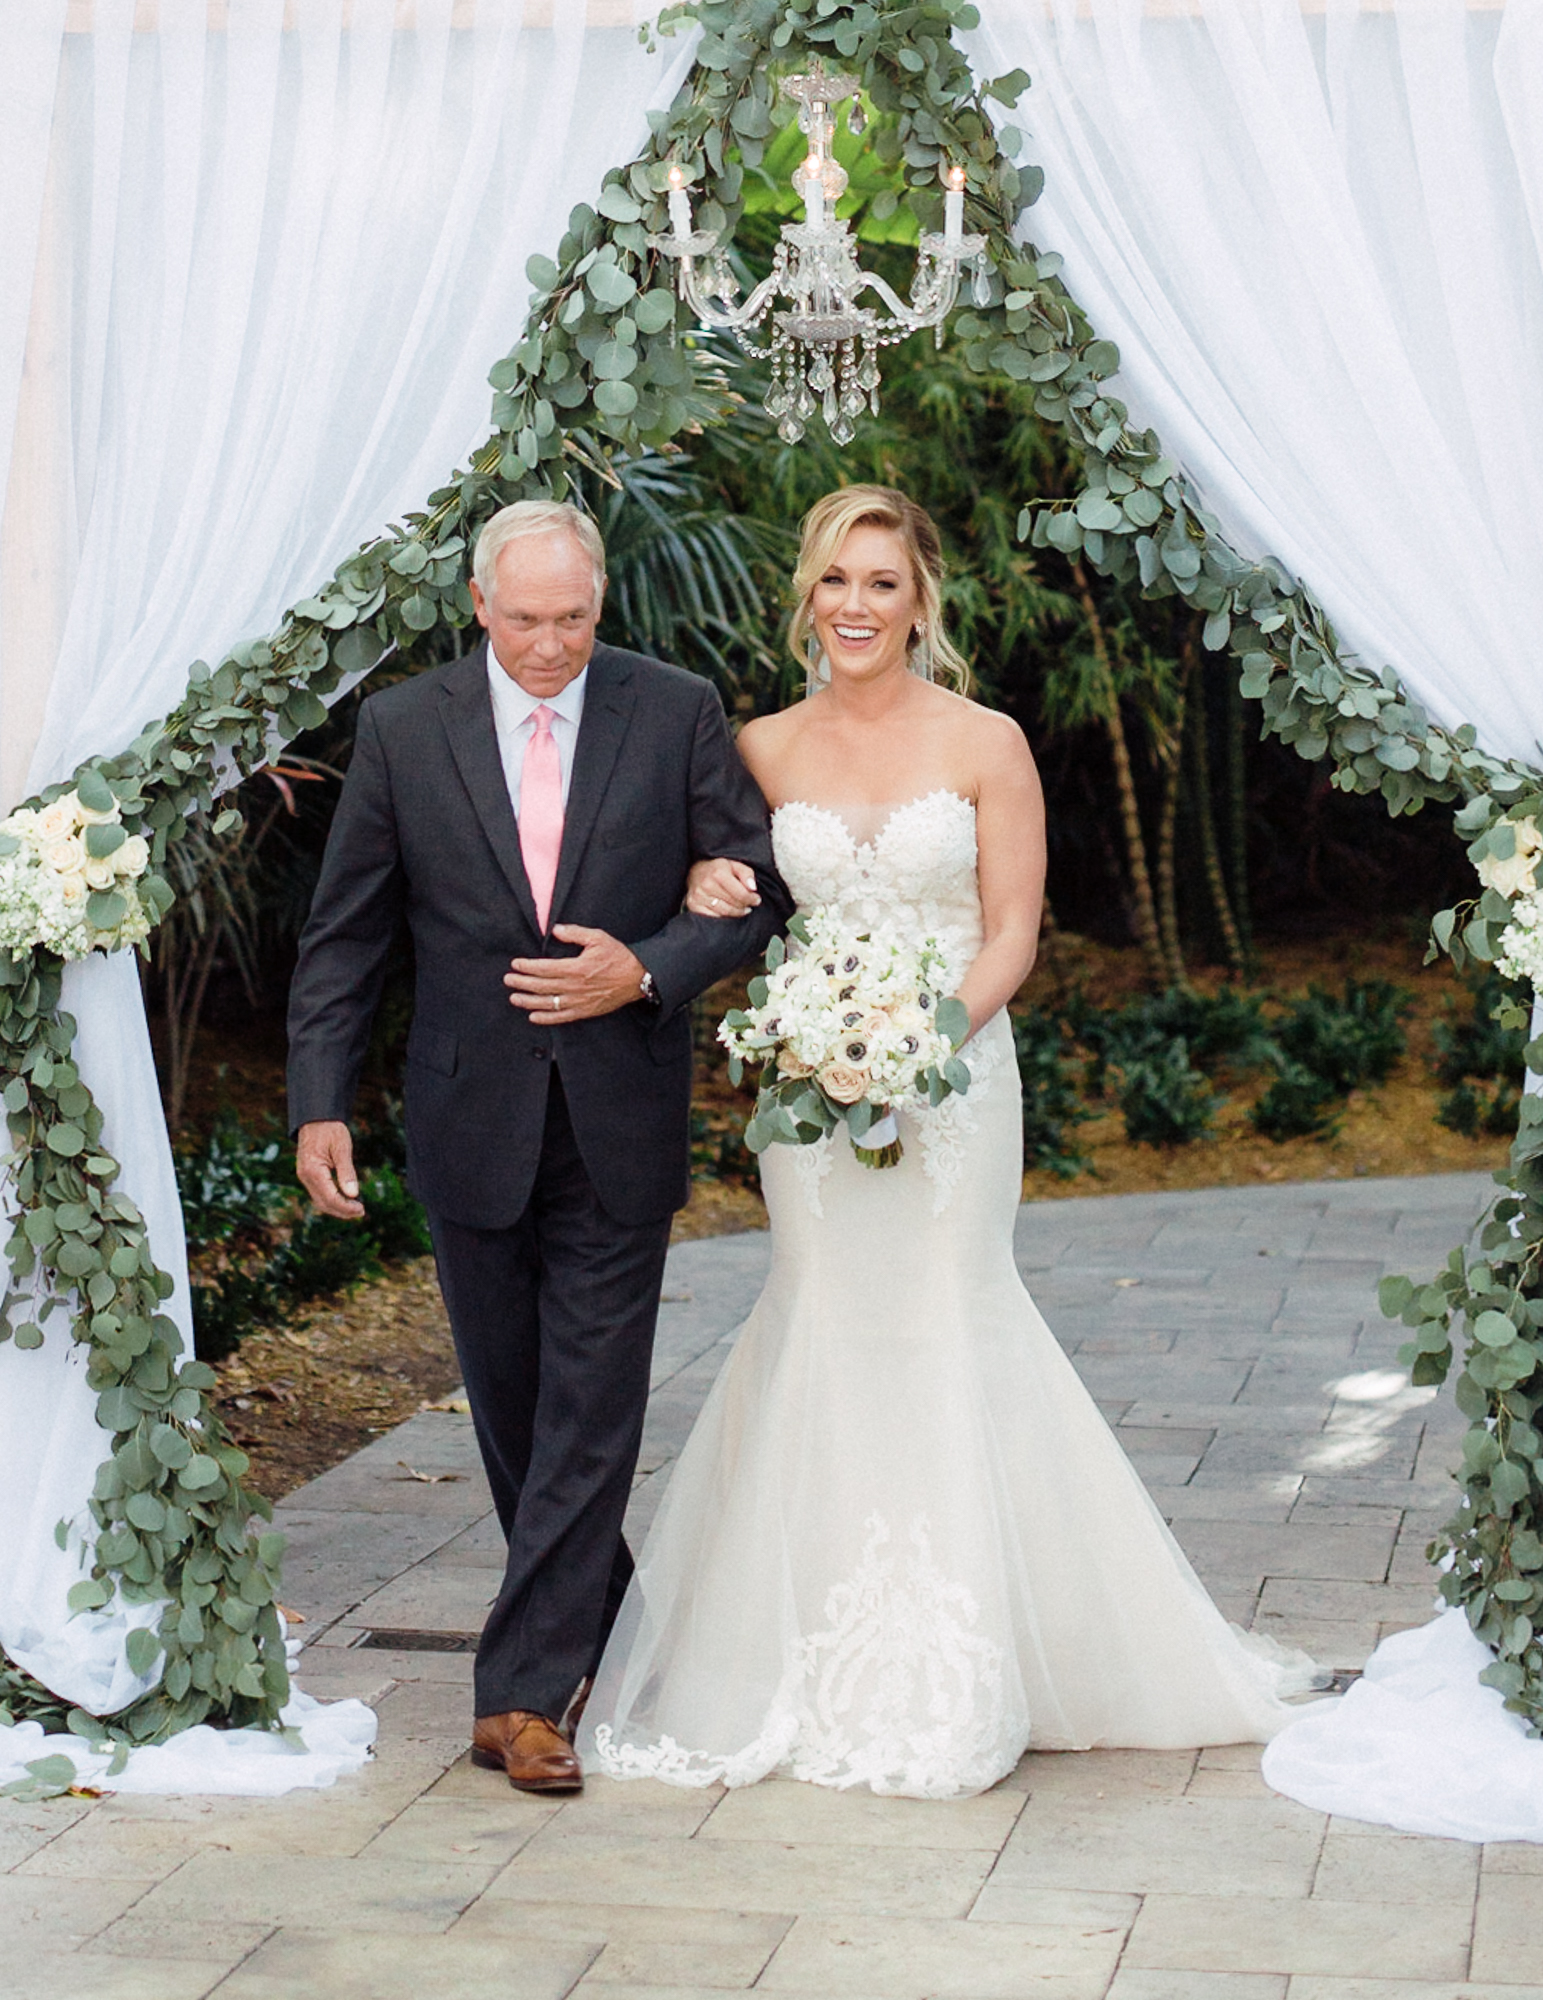 The bride walked out from a draped and chandelier archway